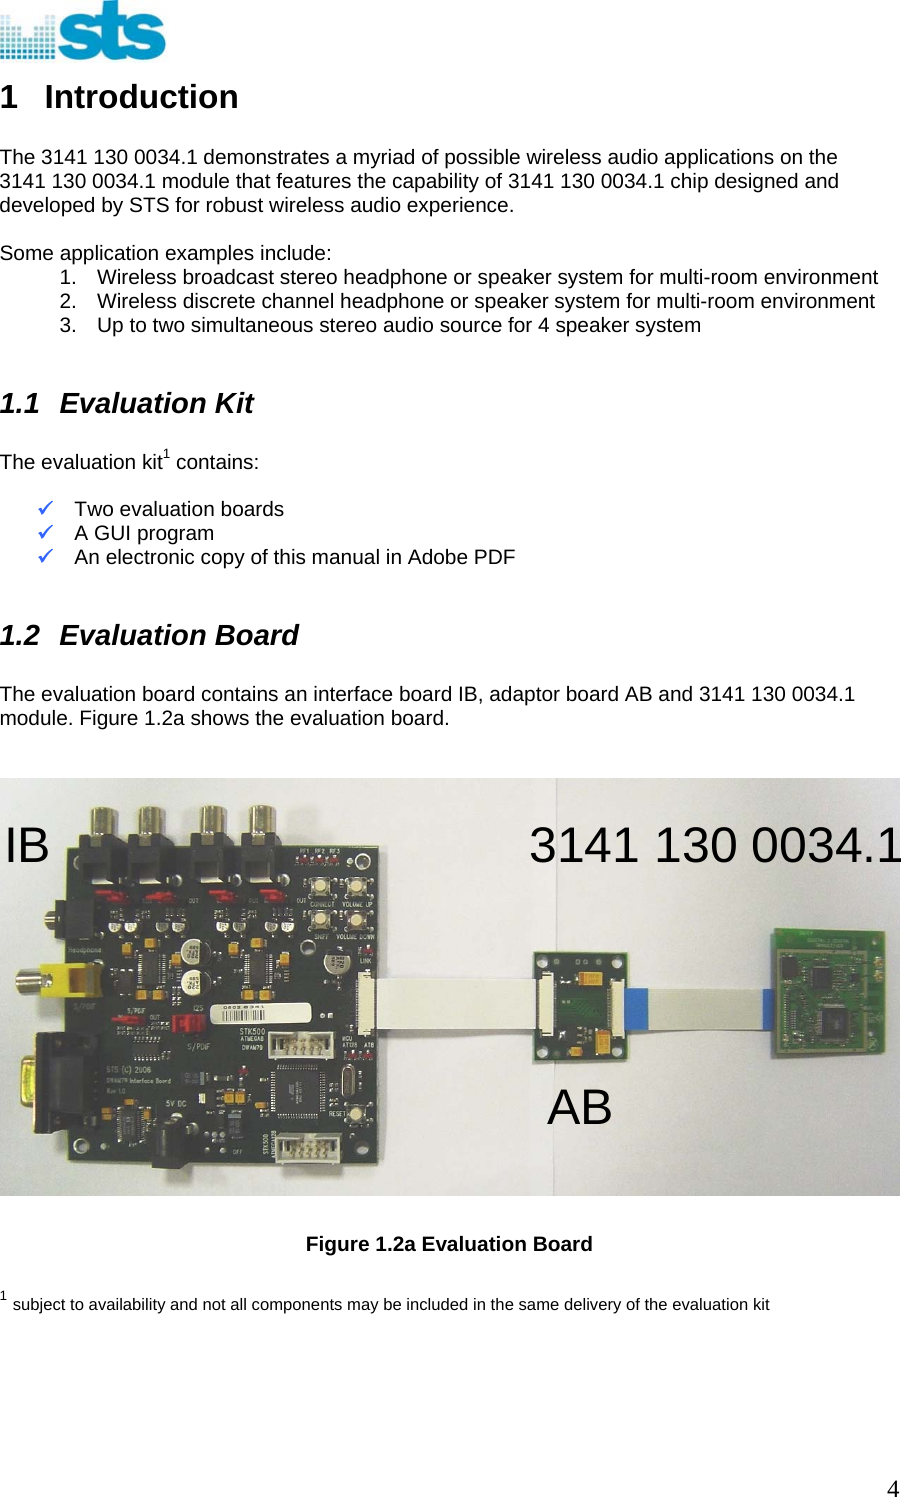  1 Introduction  The 3141 130 0034.1 demonstrates a myriad of possible wireless audio applications on the 3141 130 0034.1 module that features the capability of 3141 130 0034.1 chip designed and developed by STS for robust wireless audio experience.   Some application examples include: 1.  Wireless broadcast stereo headphone or speaker system for multi-room environment 2.  Wireless discrete channel headphone or speaker system for multi-room environment 3.  Up to two simultaneous stereo audio source for 4 speaker system  1.1 Evaluation Kit  The evaluation kit1 contains:  9 Two evaluation boards 9 A GUI program 9 An electronic copy of this manual in Adobe PDF  1.2 Evaluation Board  The evaluation board contains an interface board IB, adaptor board AB and 3141 130 0034.1 module. Figure 1.2a shows the evaluation board.    IB  3141 130 0034.1AB  Figure 1.2a Evaluation Board   1 subject to availability and not all components may be included in the same delivery of the evaluation kit       4